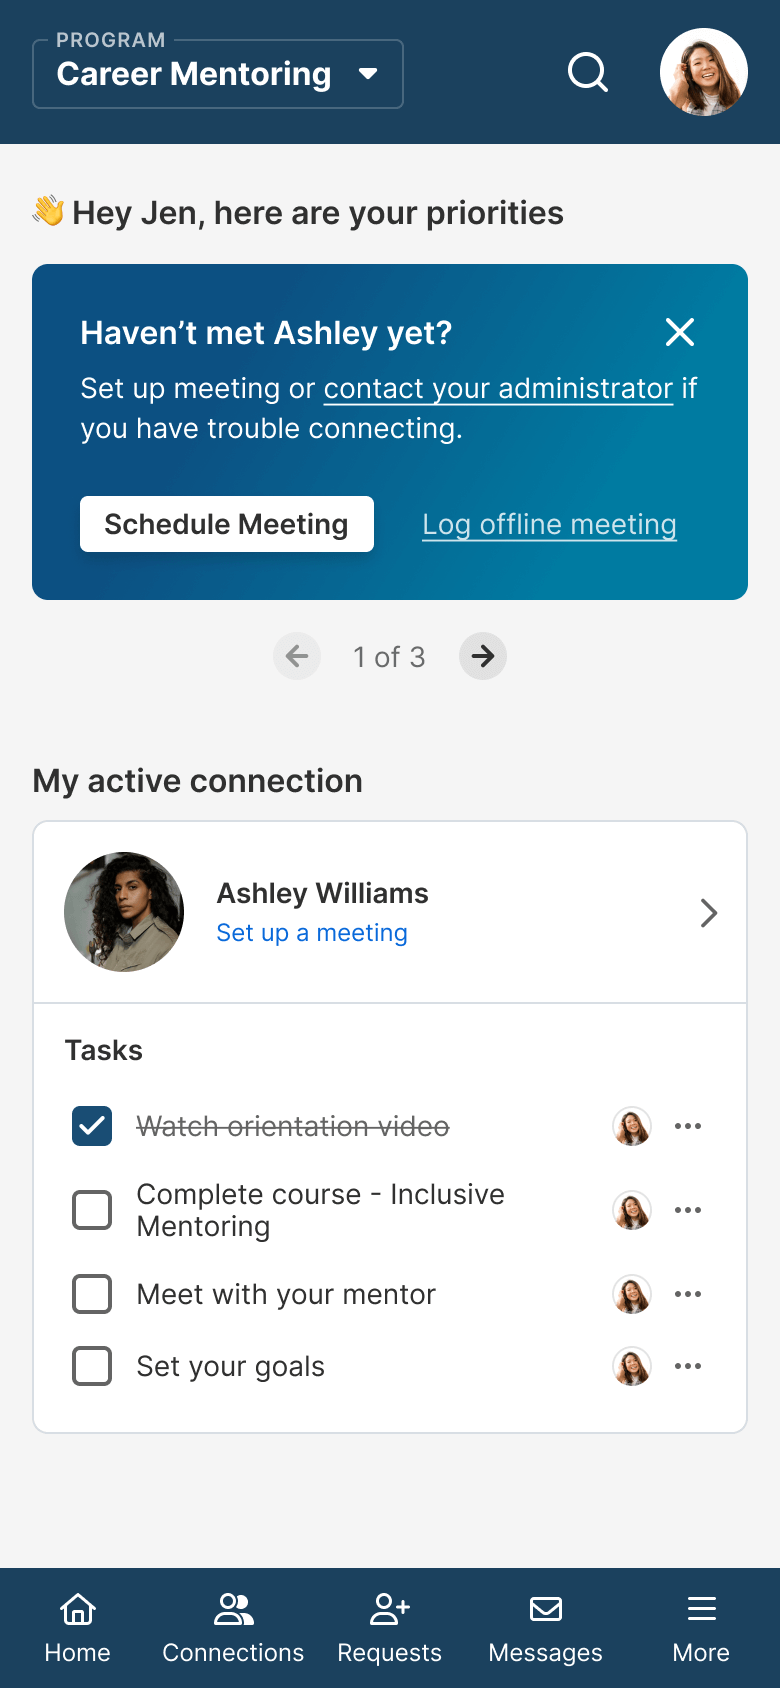 Chronus mentoring platform homepage on the mobile app, showcasing top mentee priorities and ongoing mentoring connections